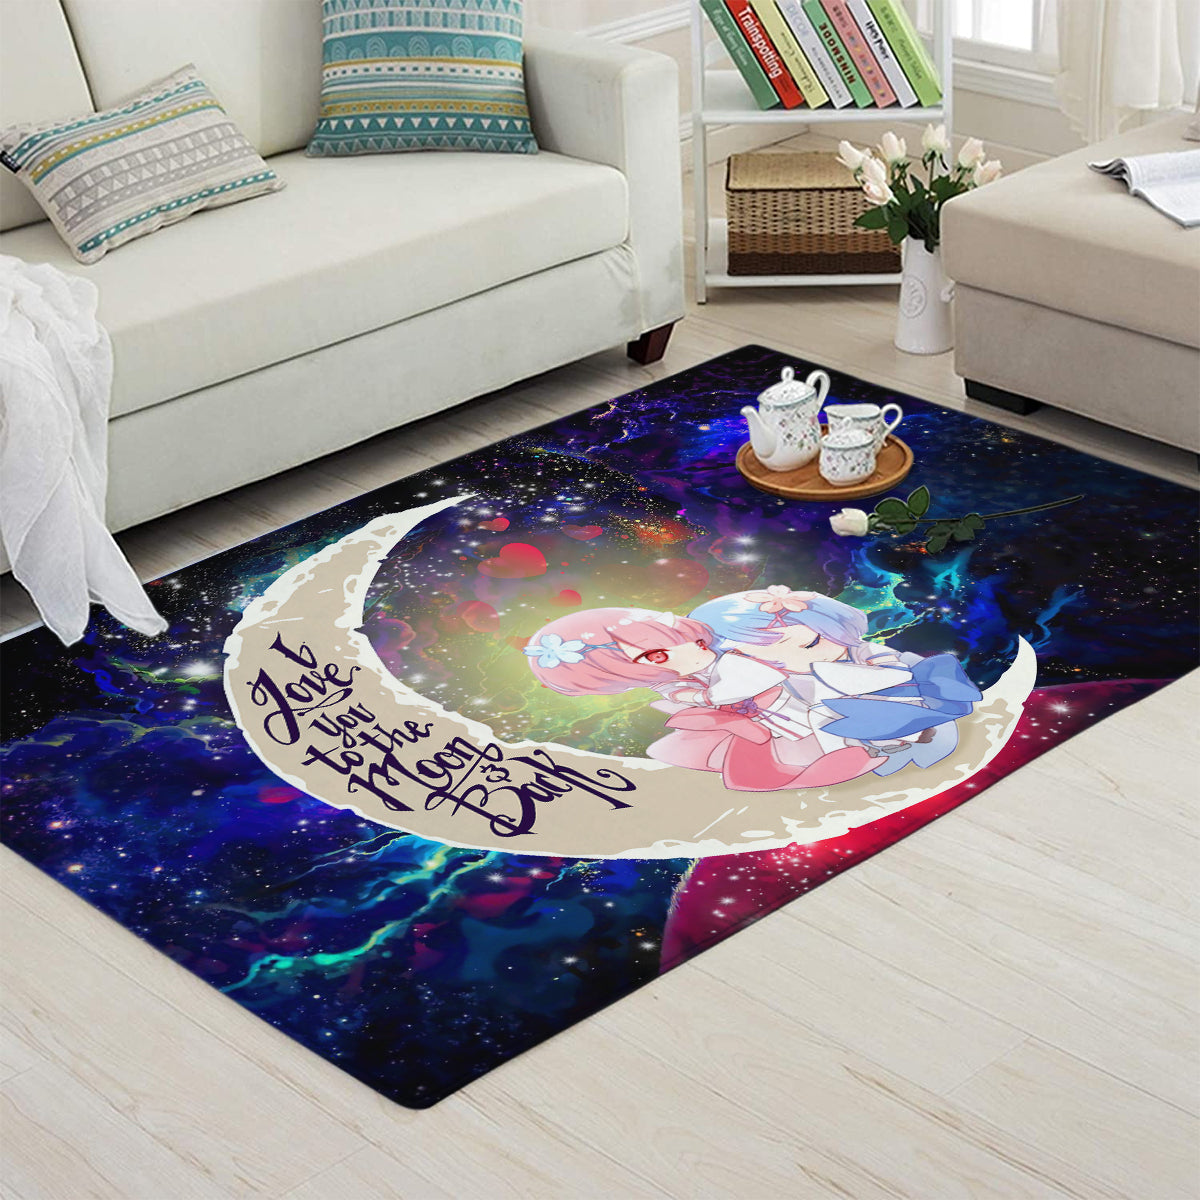 Ram And Rem Re Zero Love You To The Moon Galaxy Carpet Rug Home Room Decor